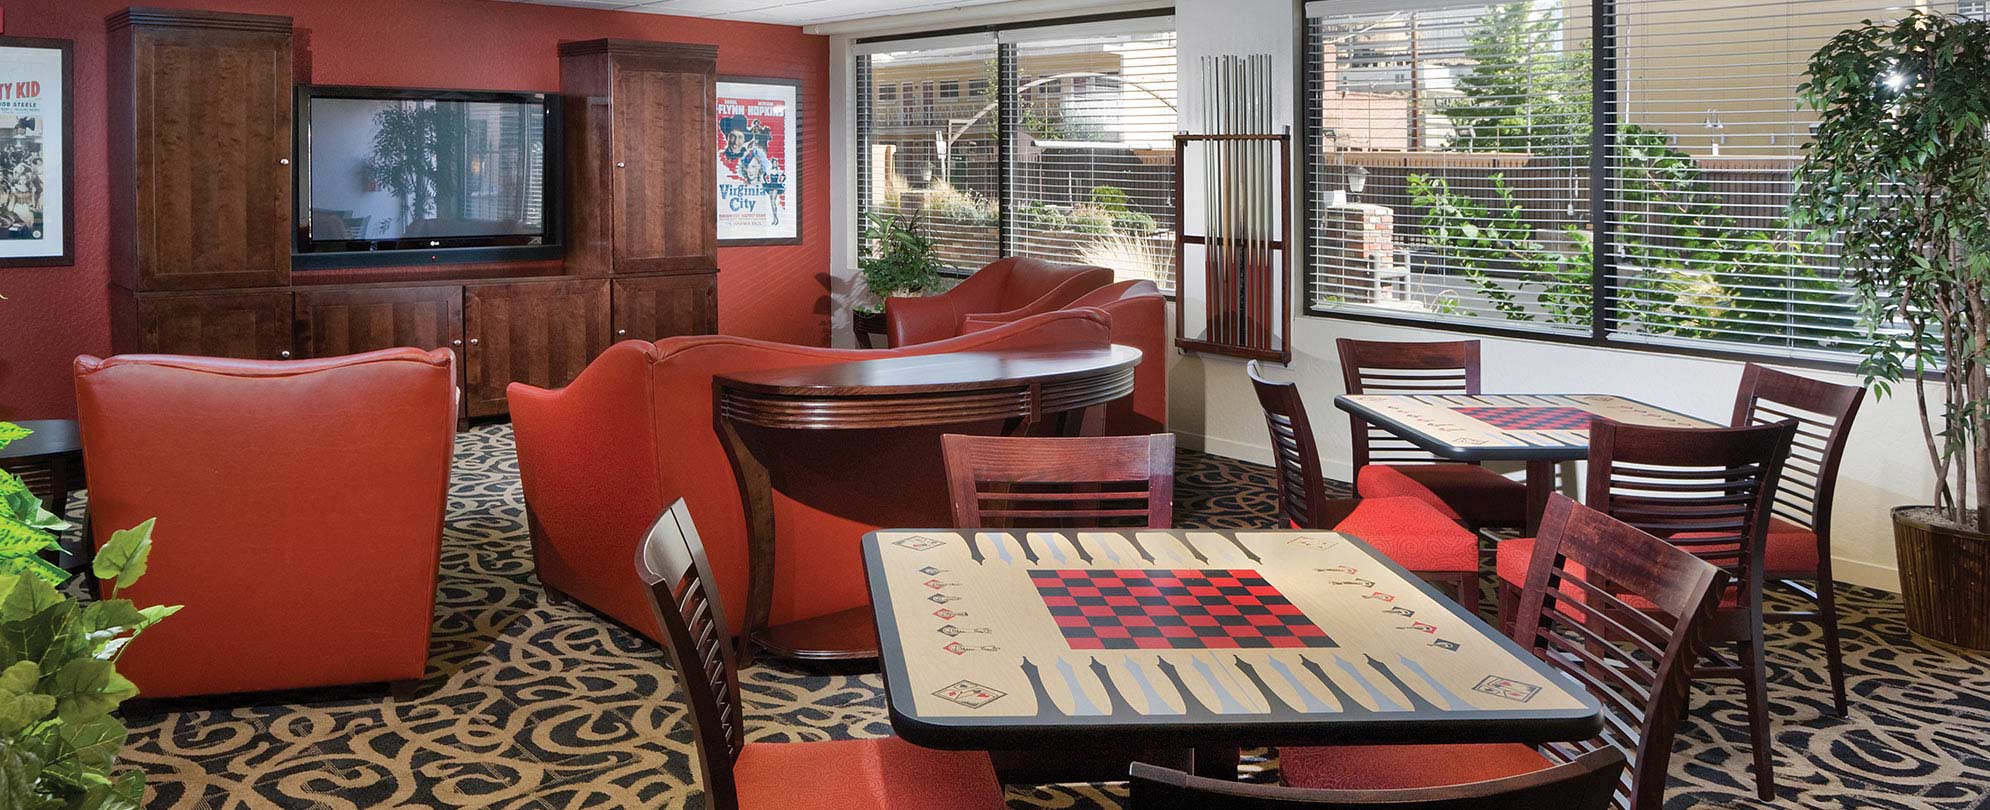 Couches, a television, and wood chairs around checker board tables at WorldMark Reno in Nevada.